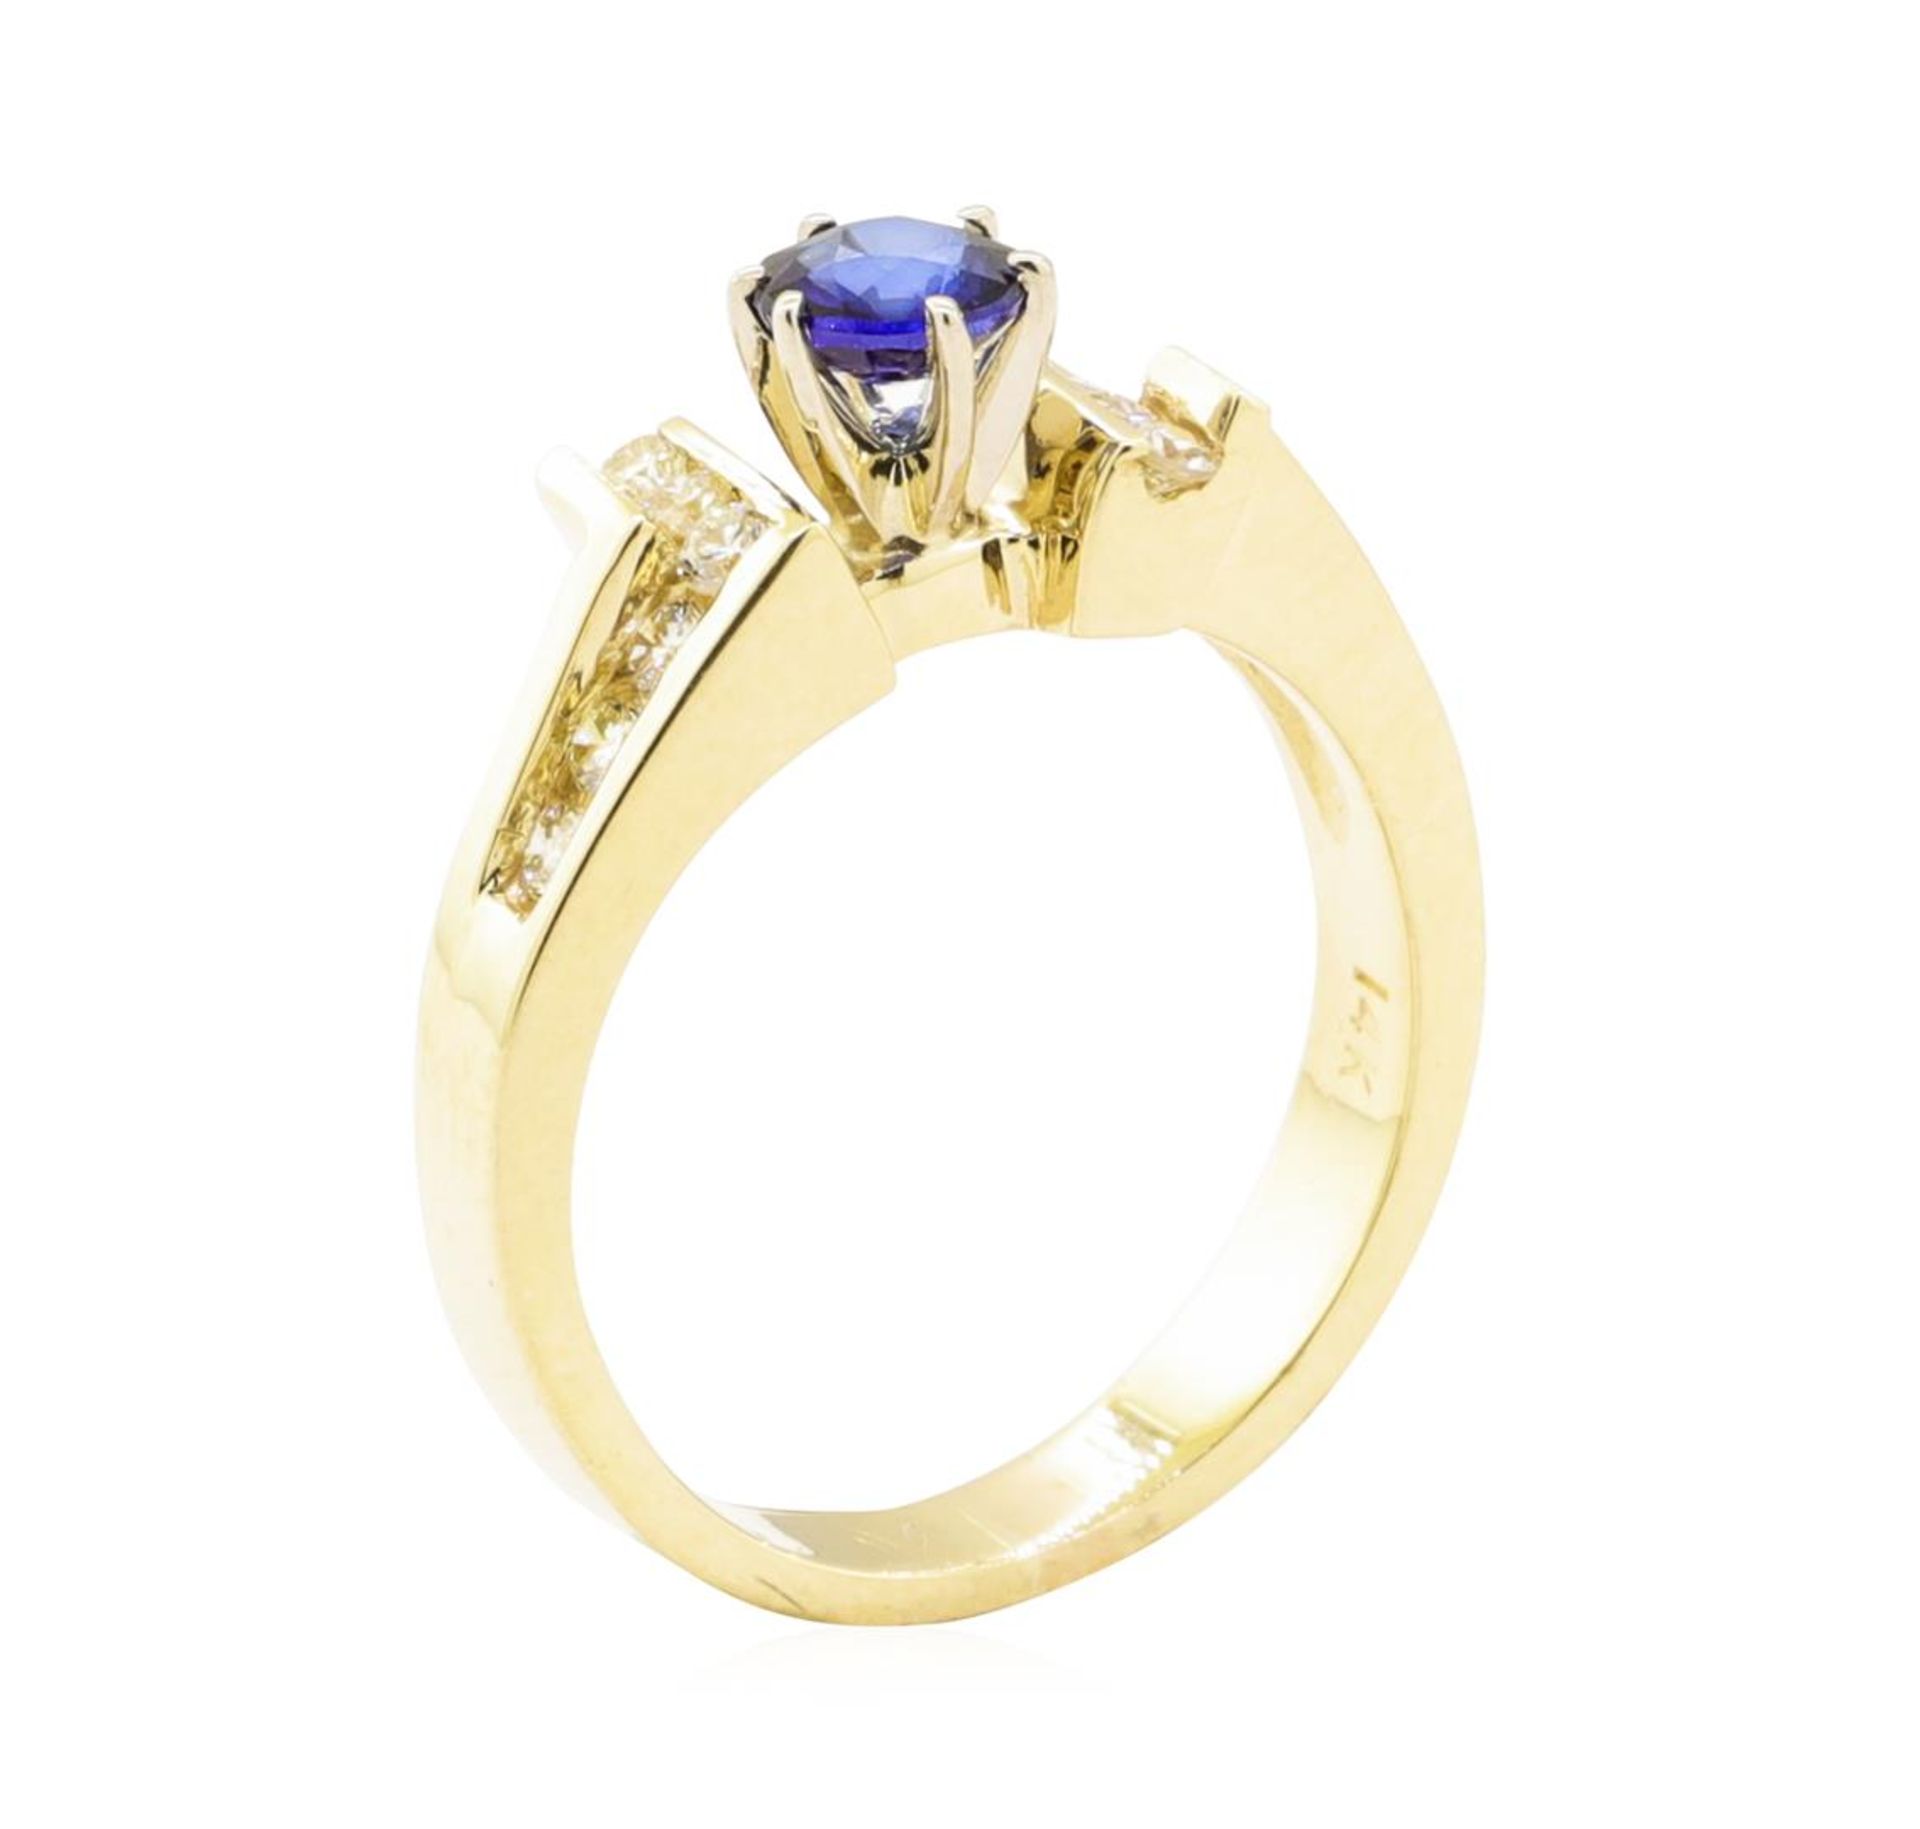 1.00 ctw Blue Sapphire and Diamond Ring - 14KT Yellow Gold - Image 4 of 4